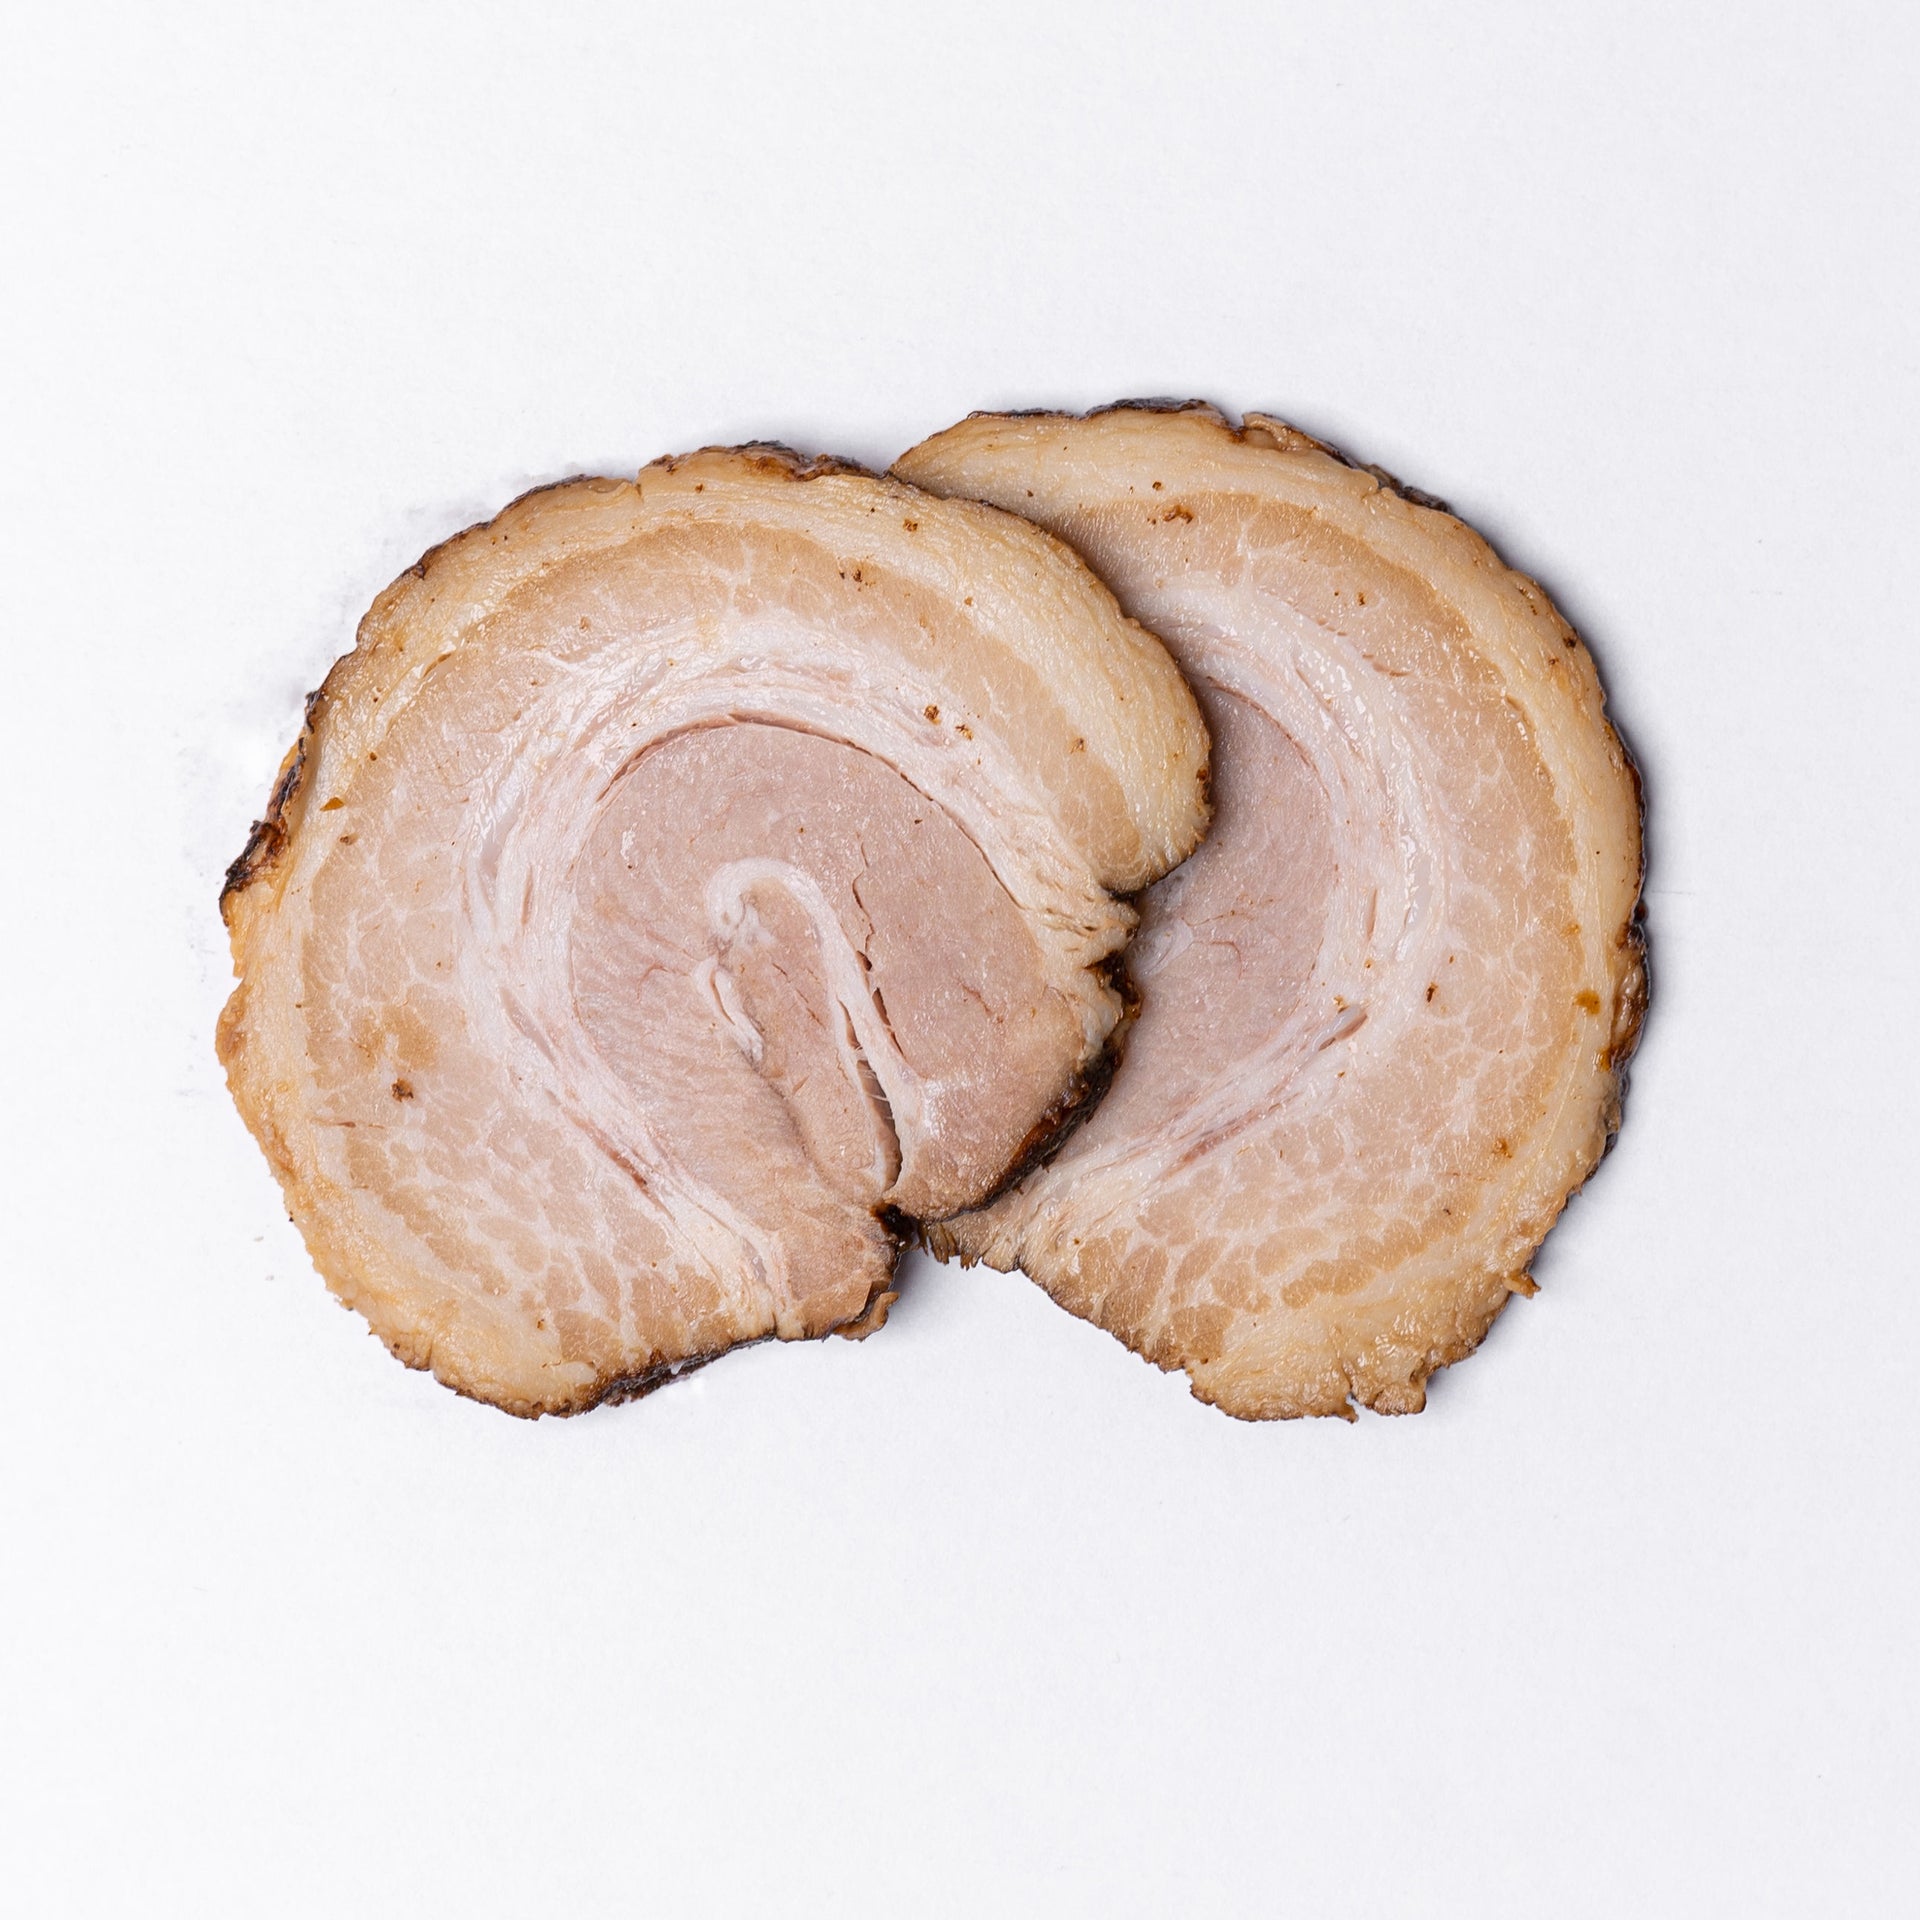 Buy Hanazen Slow Cooked Ready to Eat Chashu (Pork Belly)